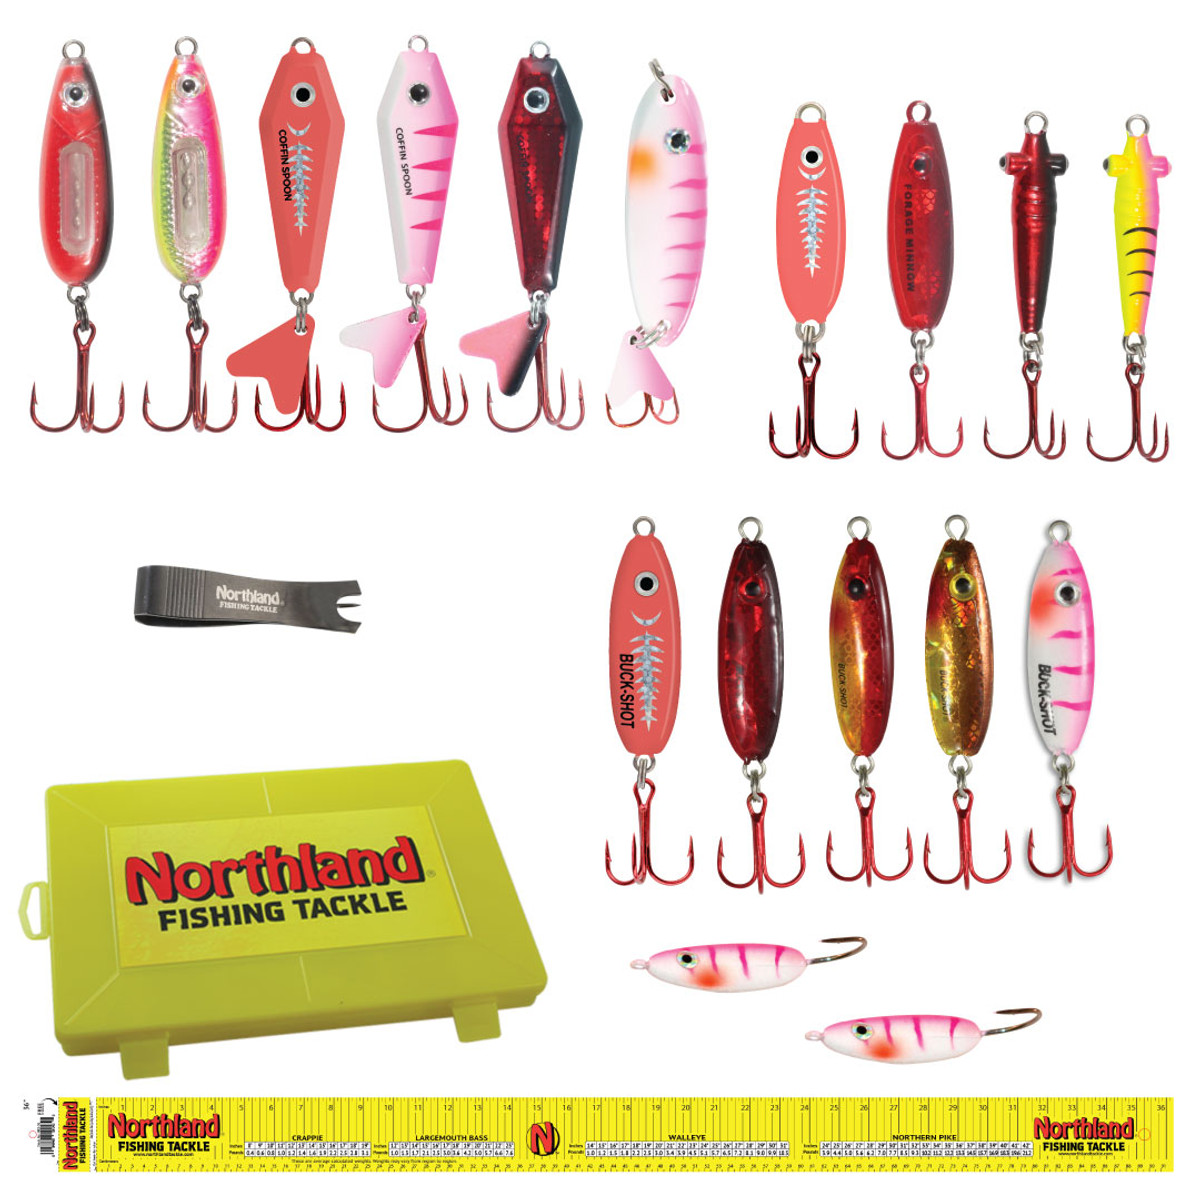 RED LAKE SPOON ASSORTMENT KIT - 21/KIT - ASSORTED WITH BOX